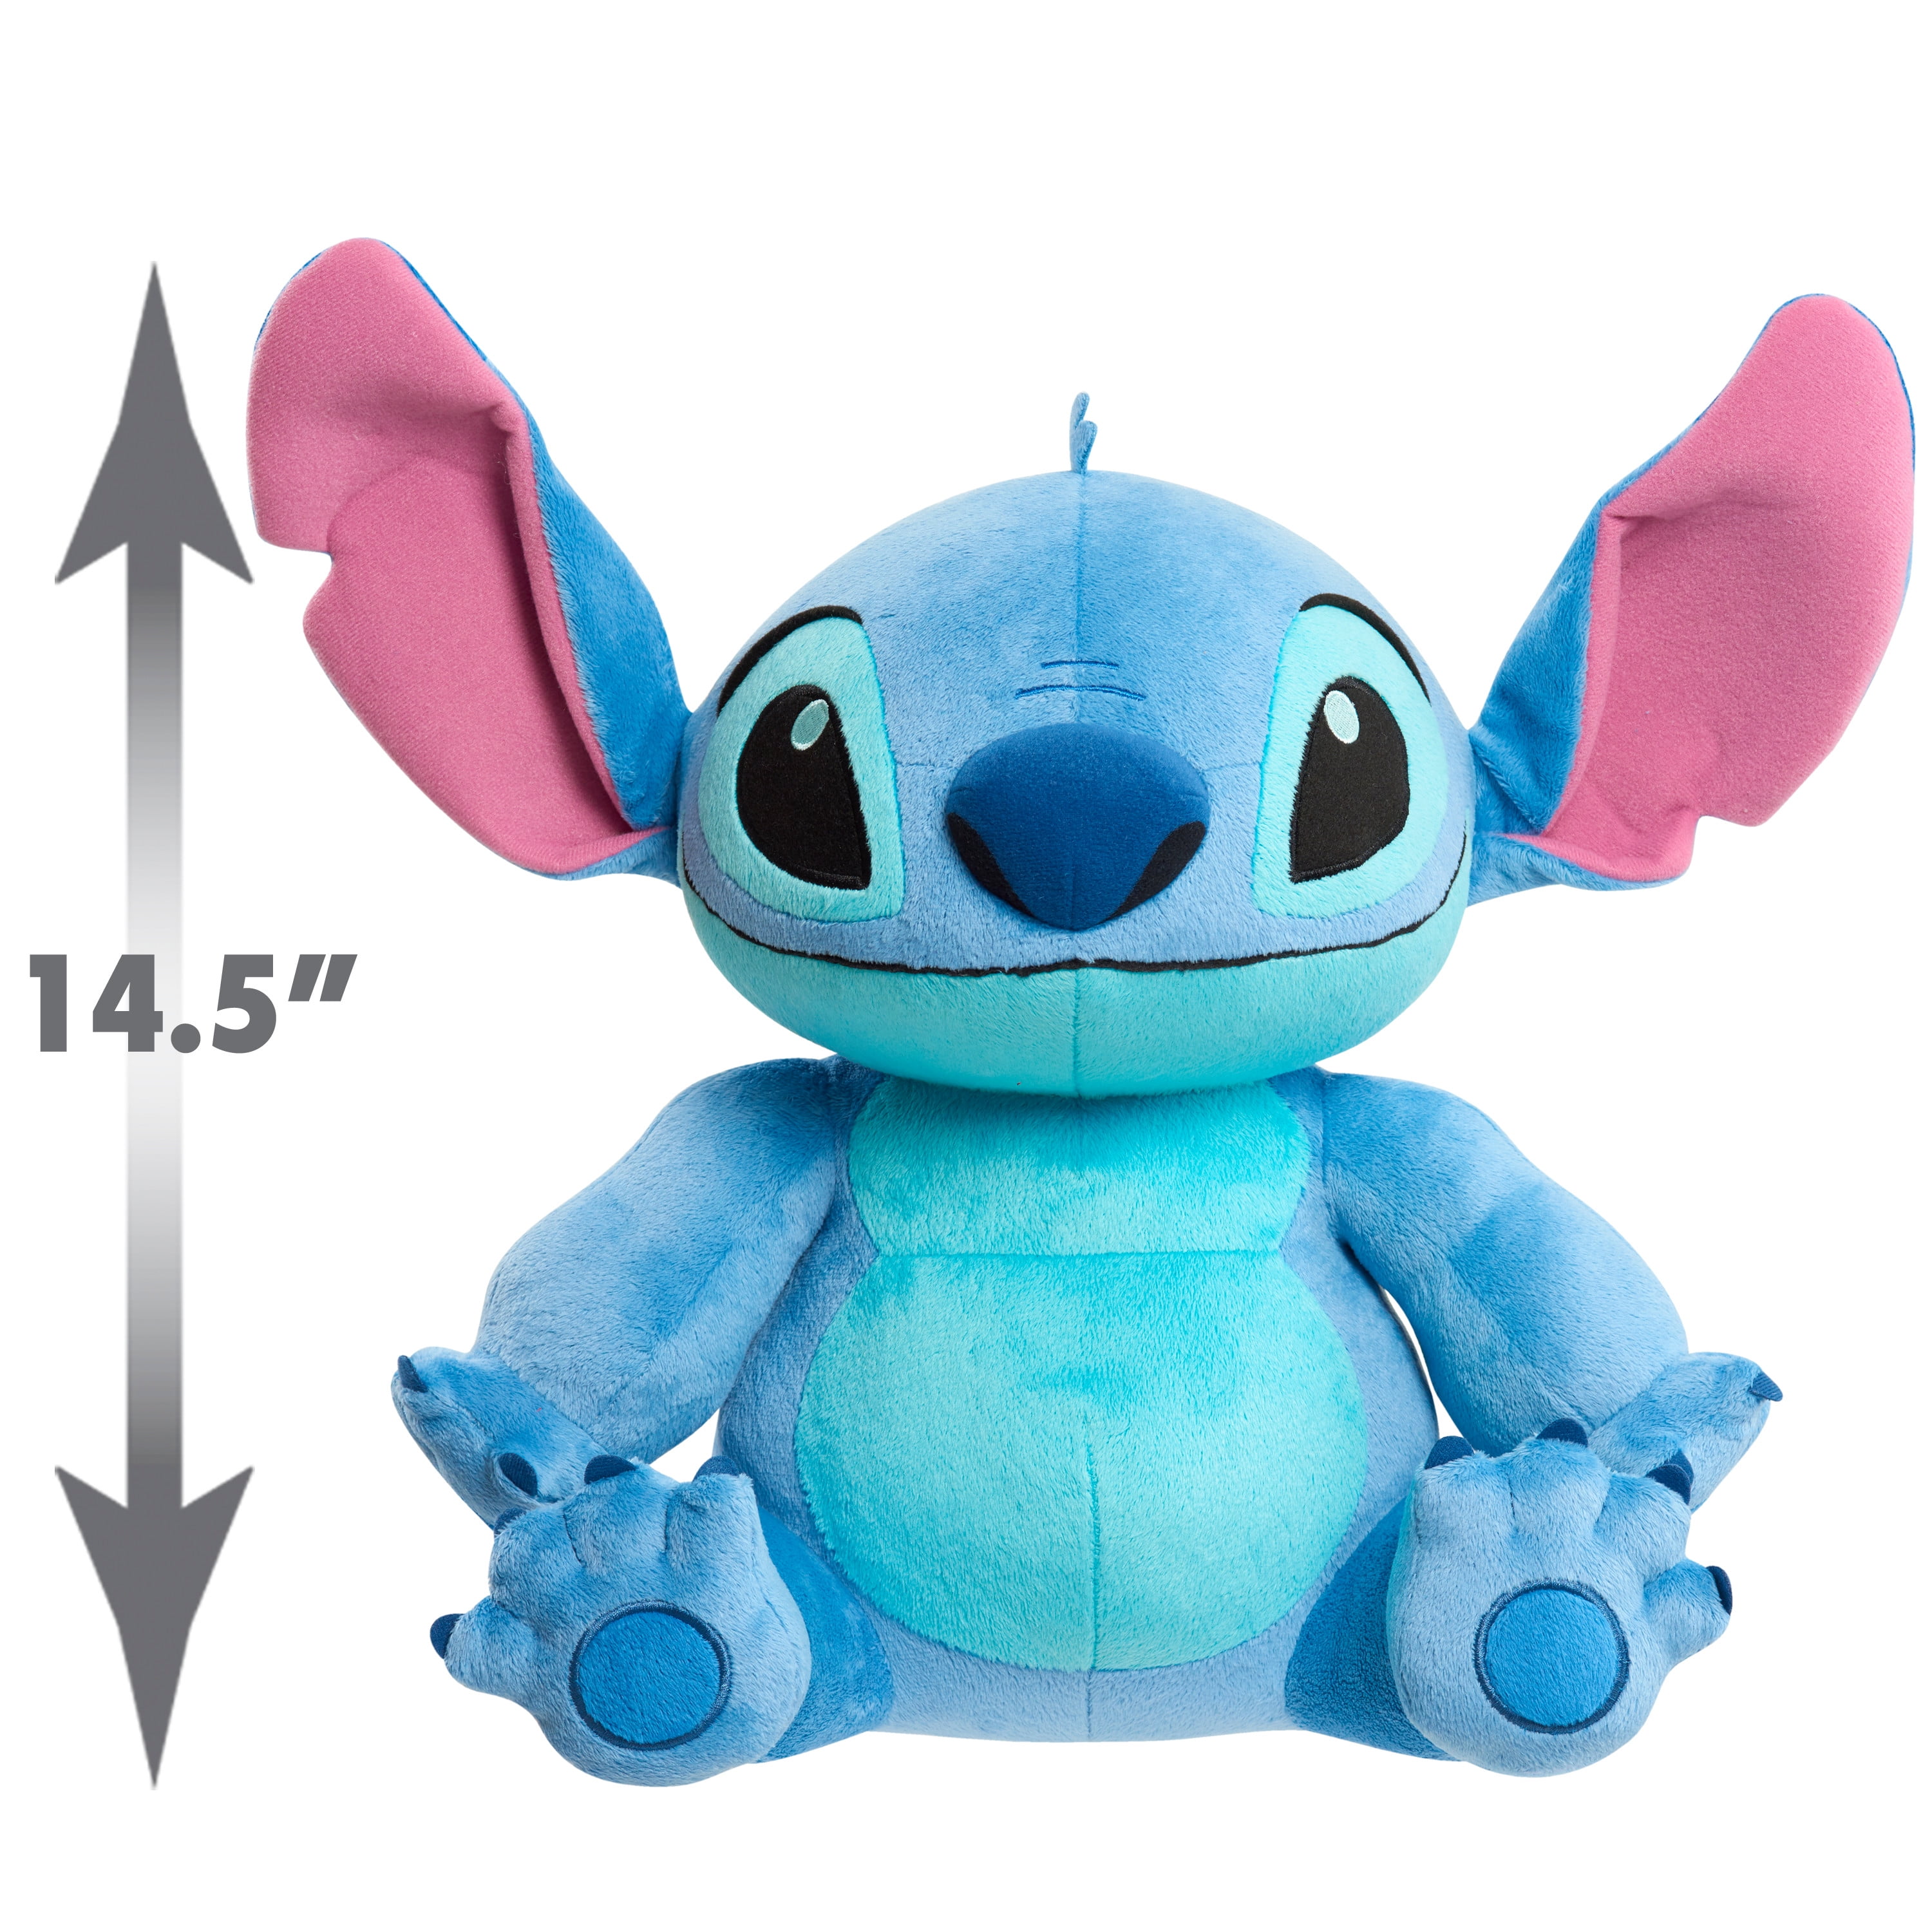 FIVE BELOW EXCLUSIVE LILO AND STITCH SQUISHMALLOW COLLECTION INDIVIDUALS